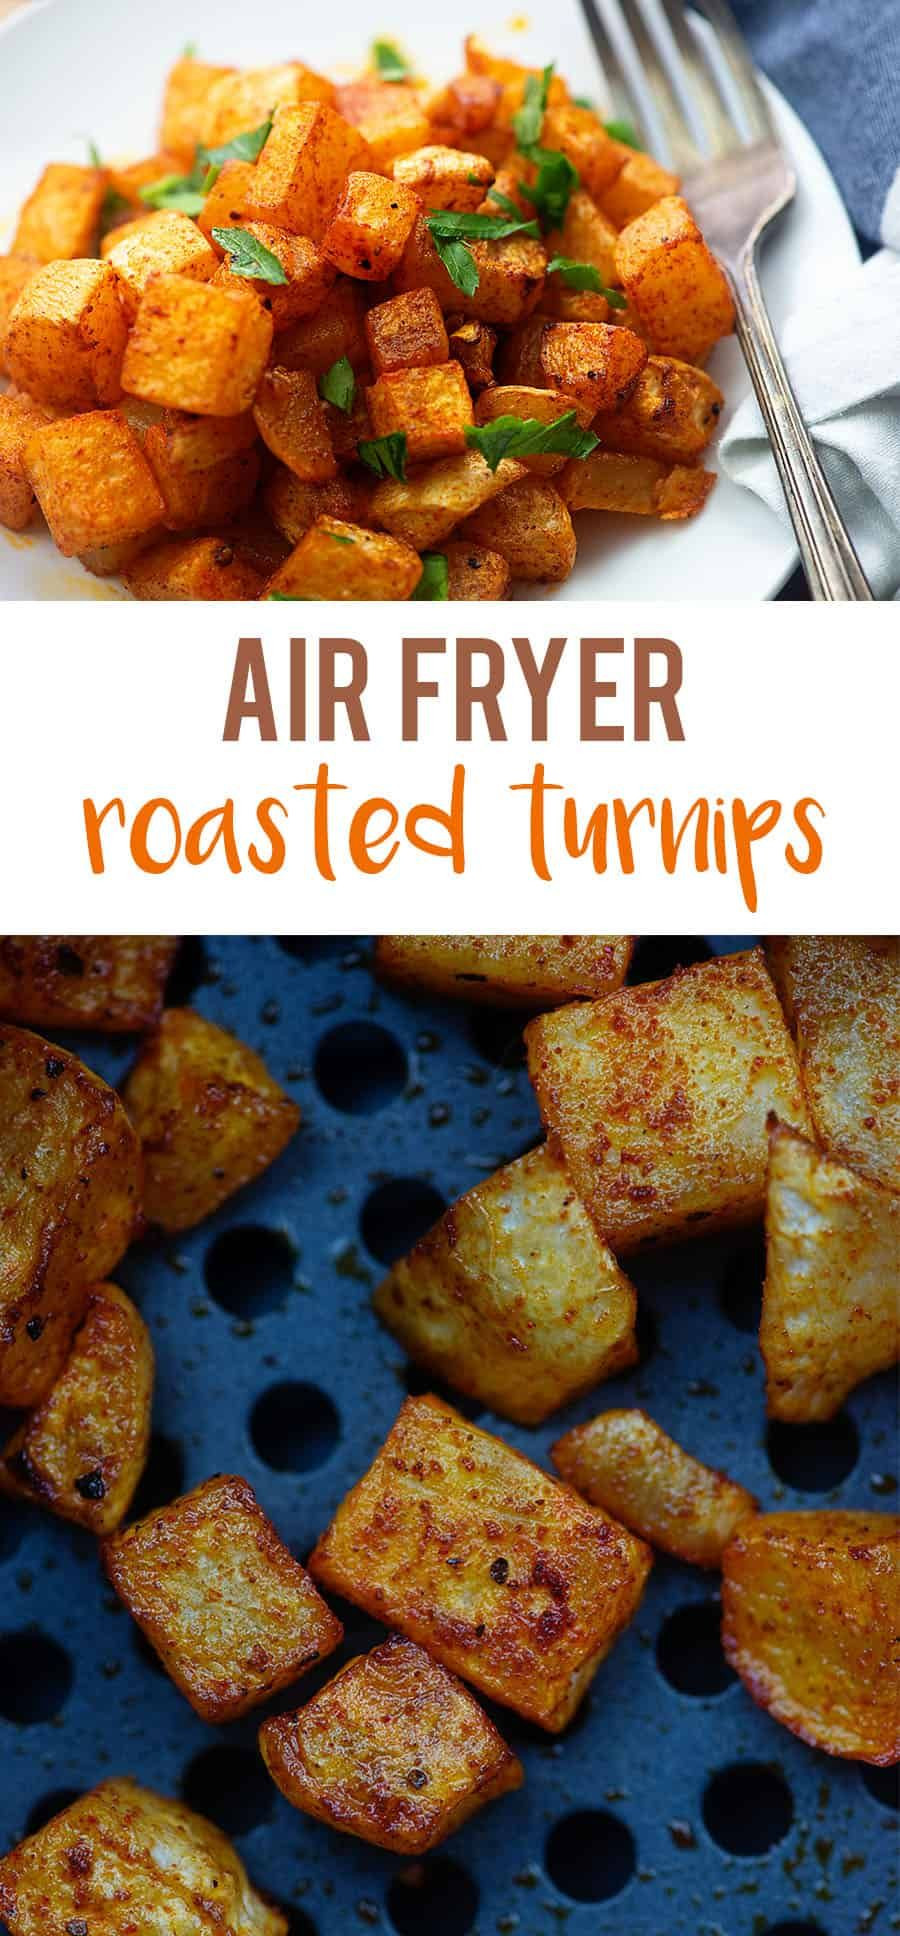 Air Fryer Low Carb Recipes
 Air Fryer Roasted Turnips This low carb side dish is